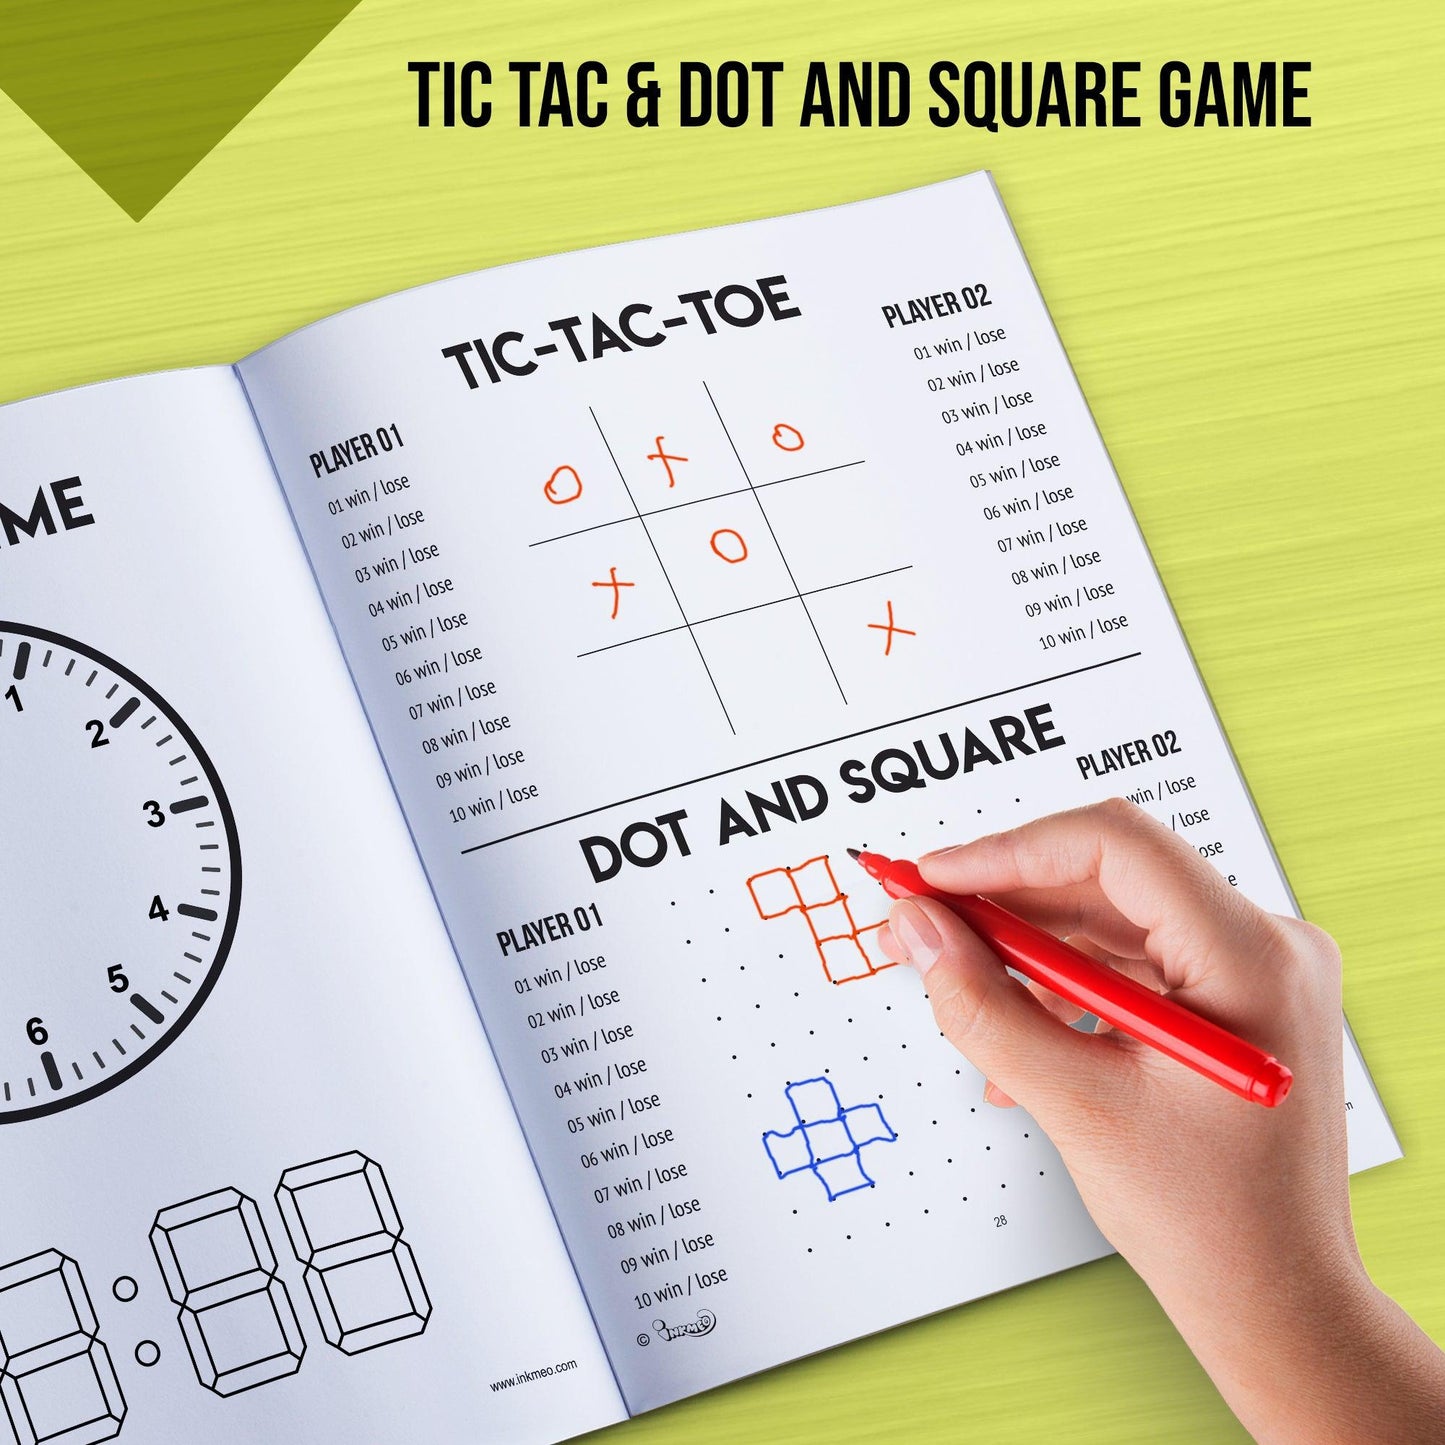 The image shows hand playing tic-tac-toe and dot and square in the book,